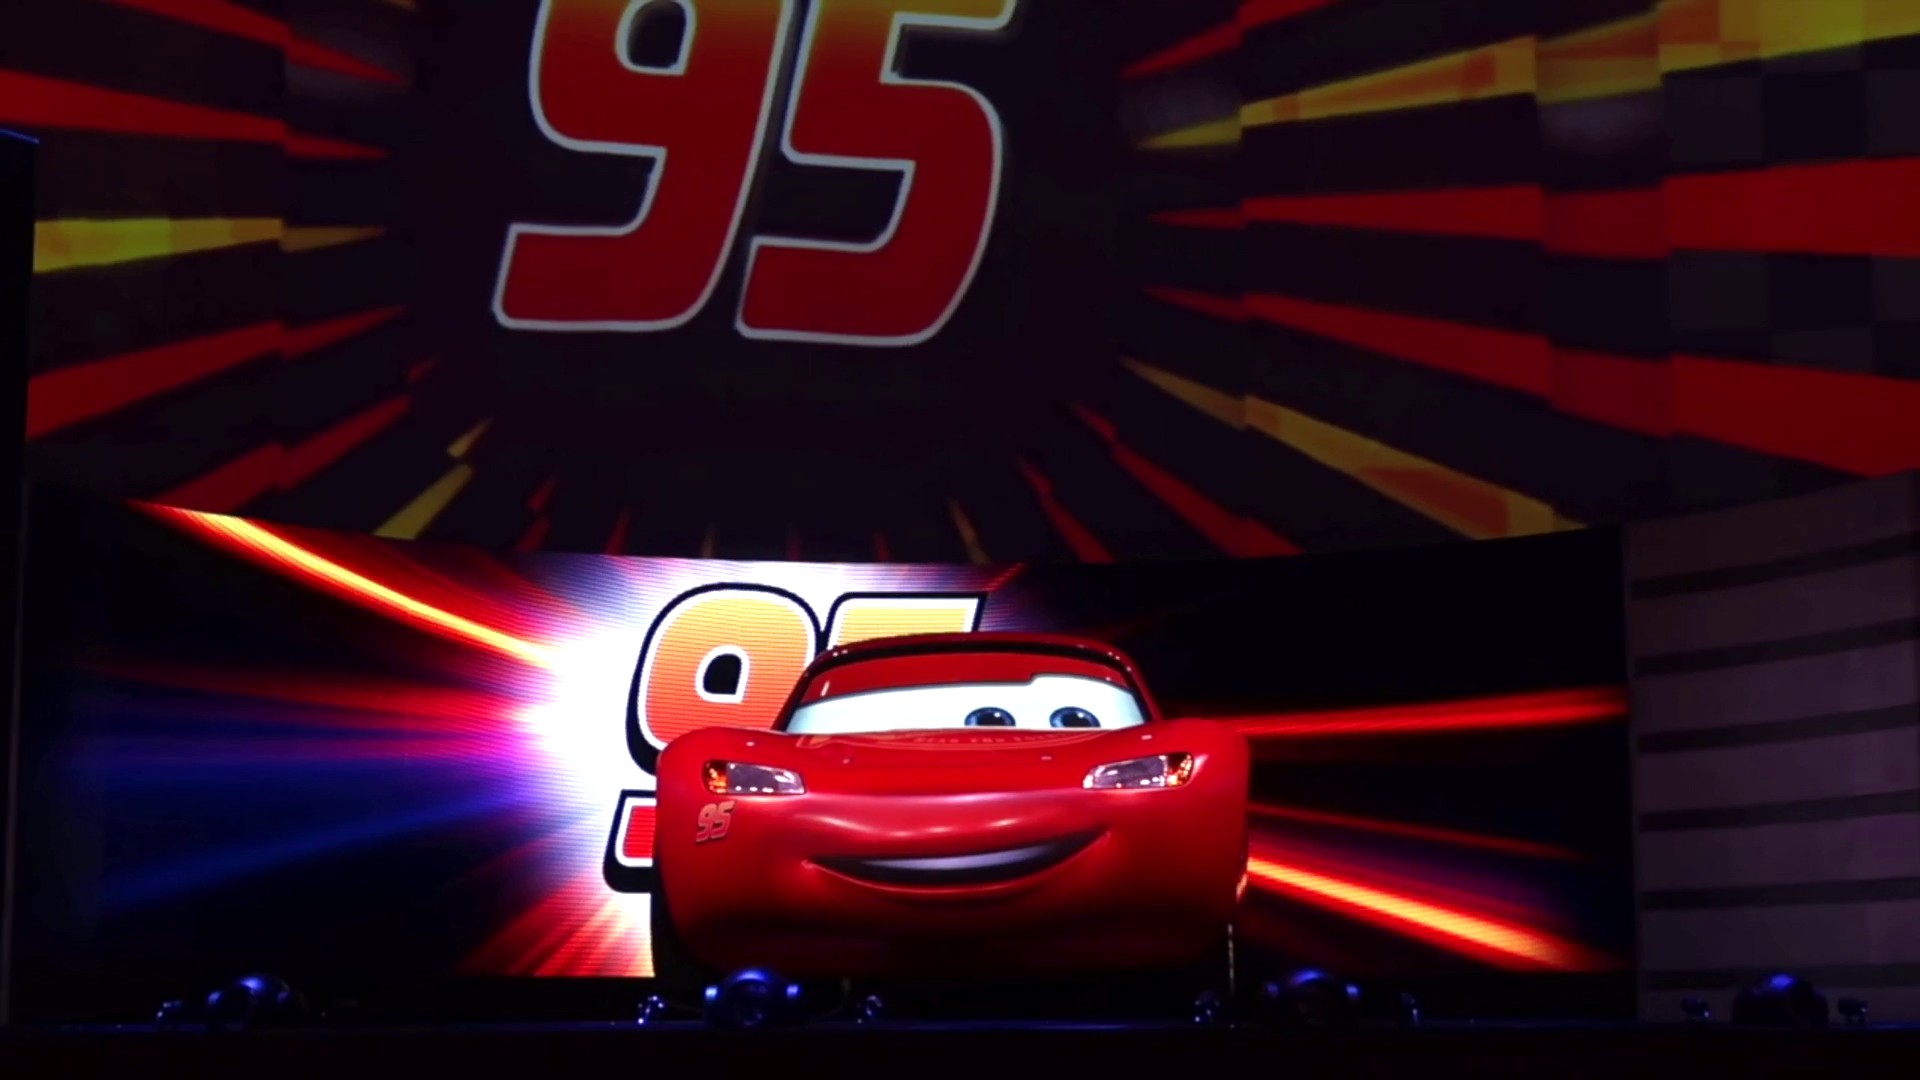 Lightning McQueen's Racing Academy offers high-speed fun for rookie racers